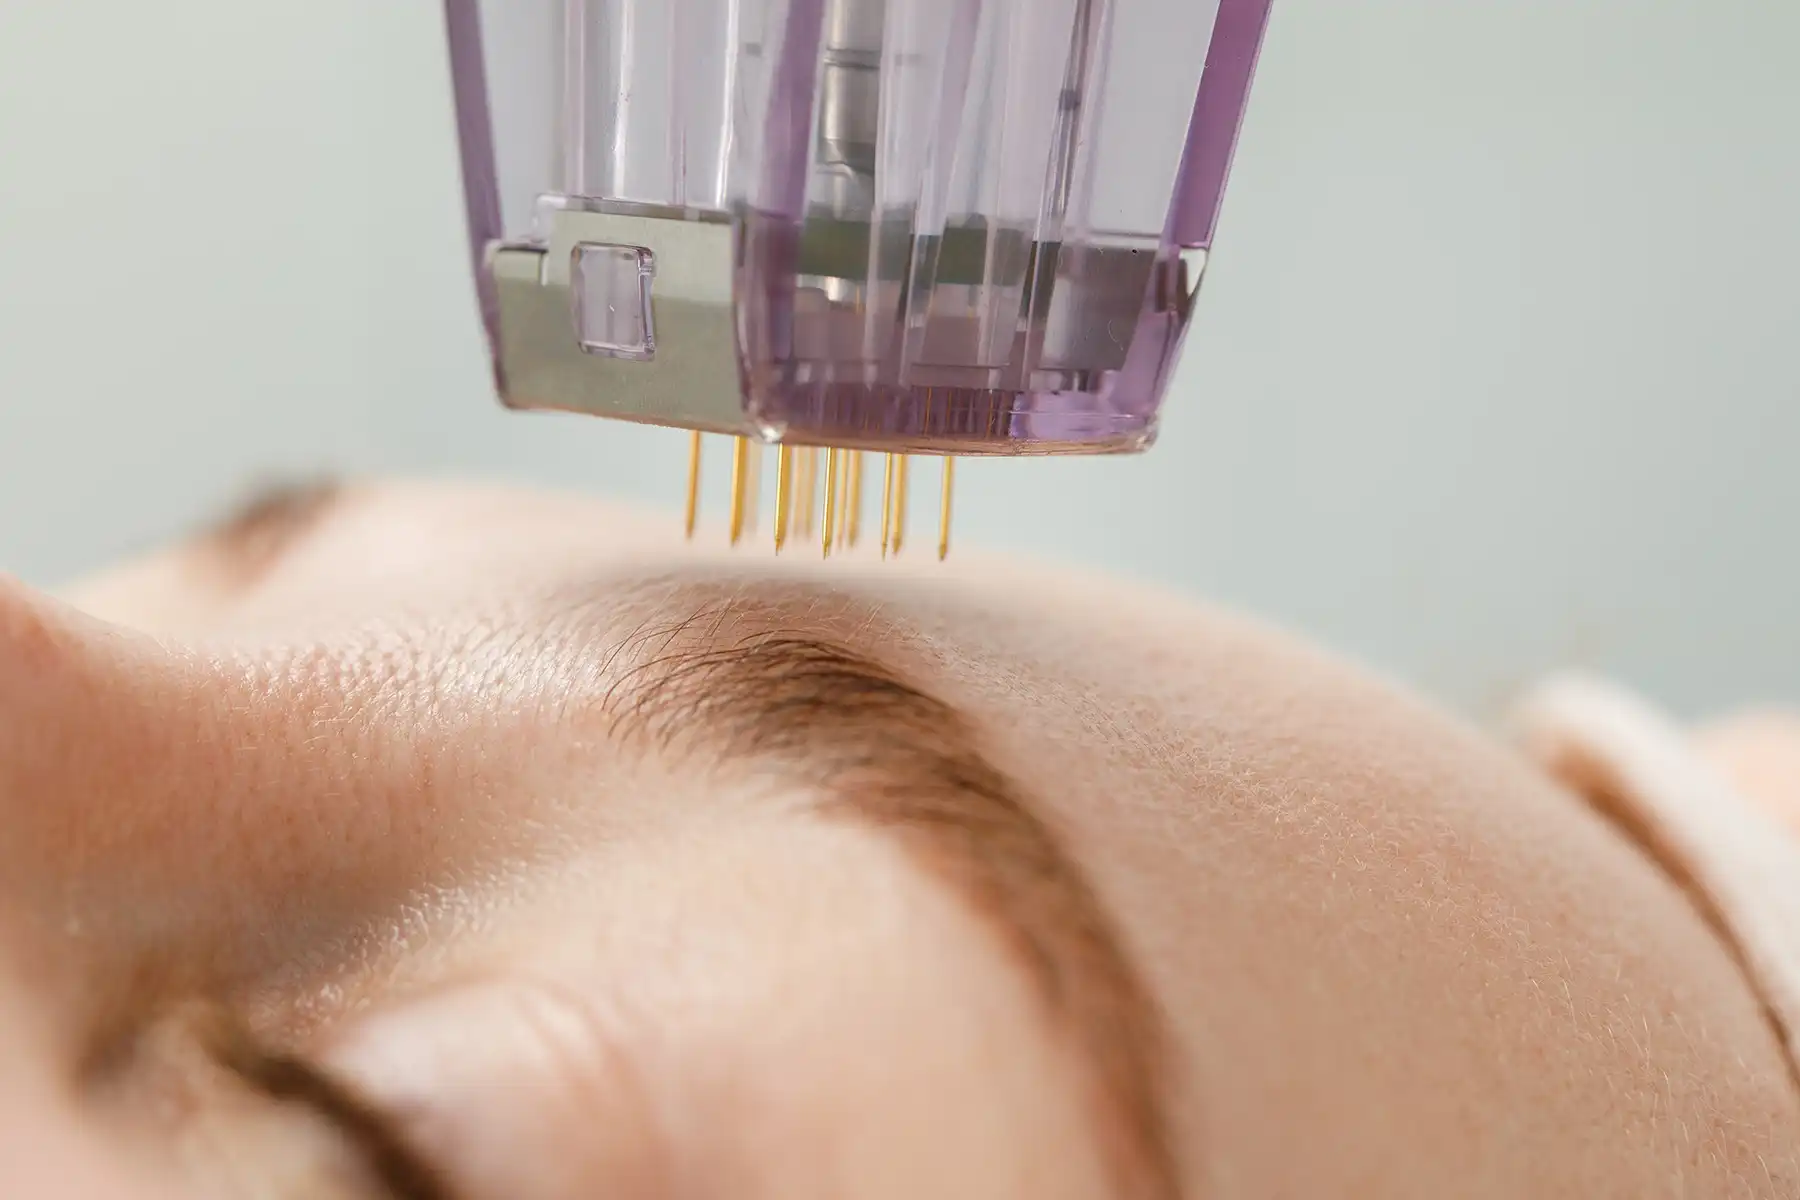 Microneedling device on a woman's forehead.